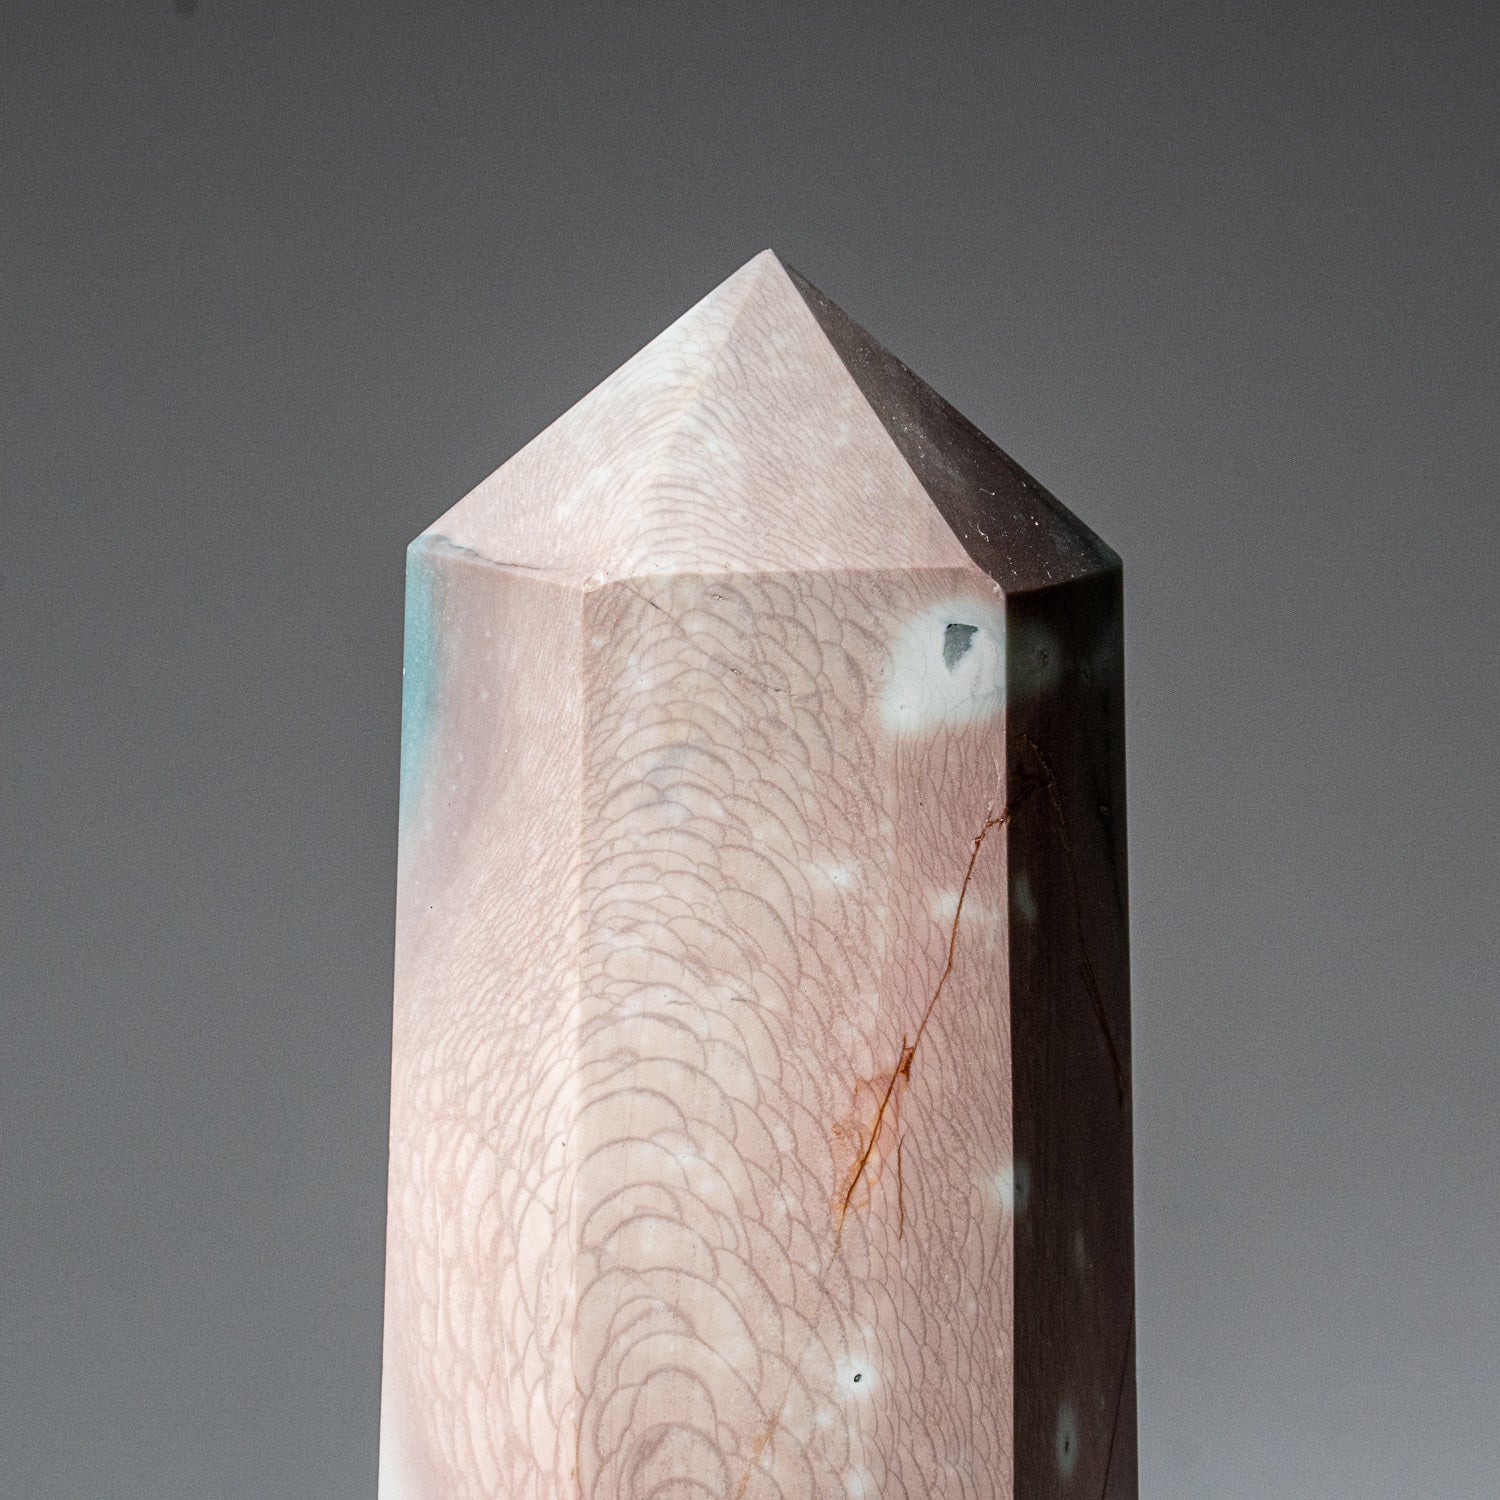 Polished Polychrome Point from Madagascar (1.7 lbs)